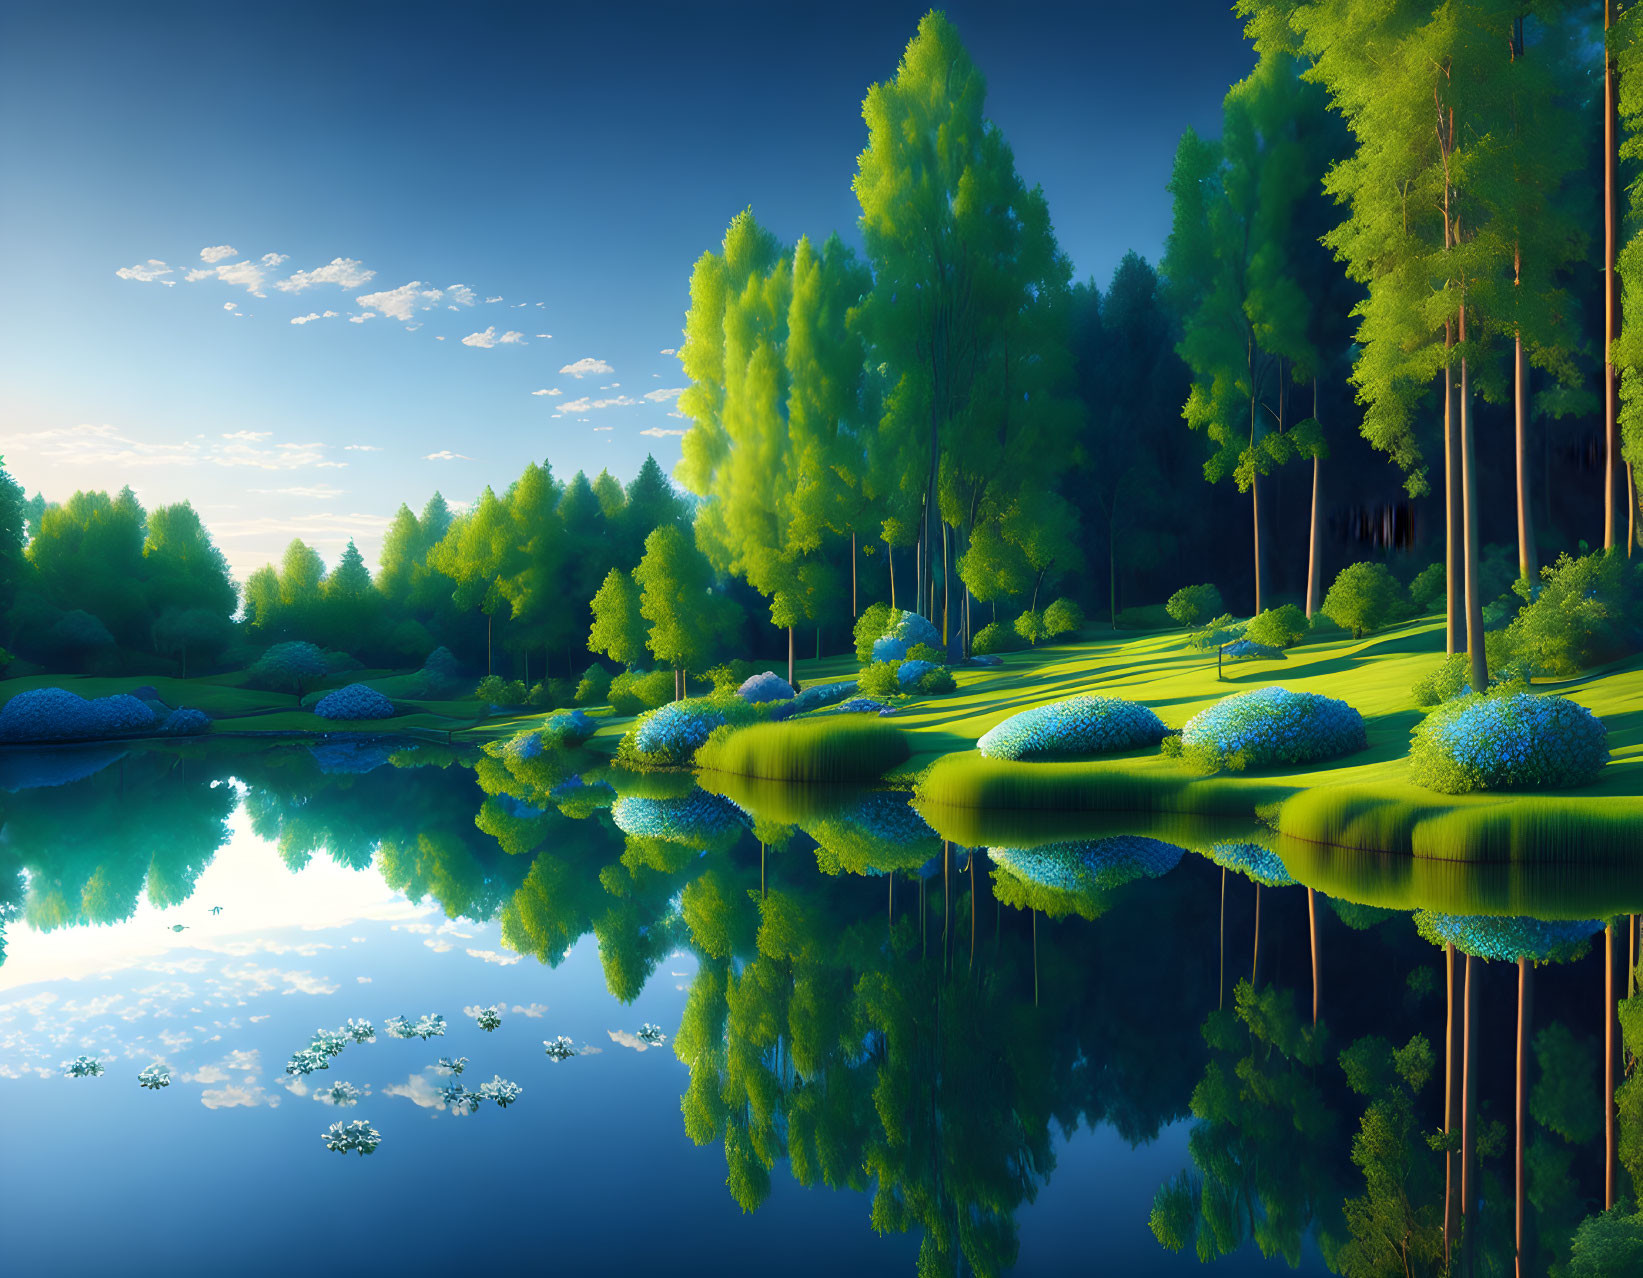 Tranquil landscape: lush green trees, vibrant grass, serene blue lake, and white water l